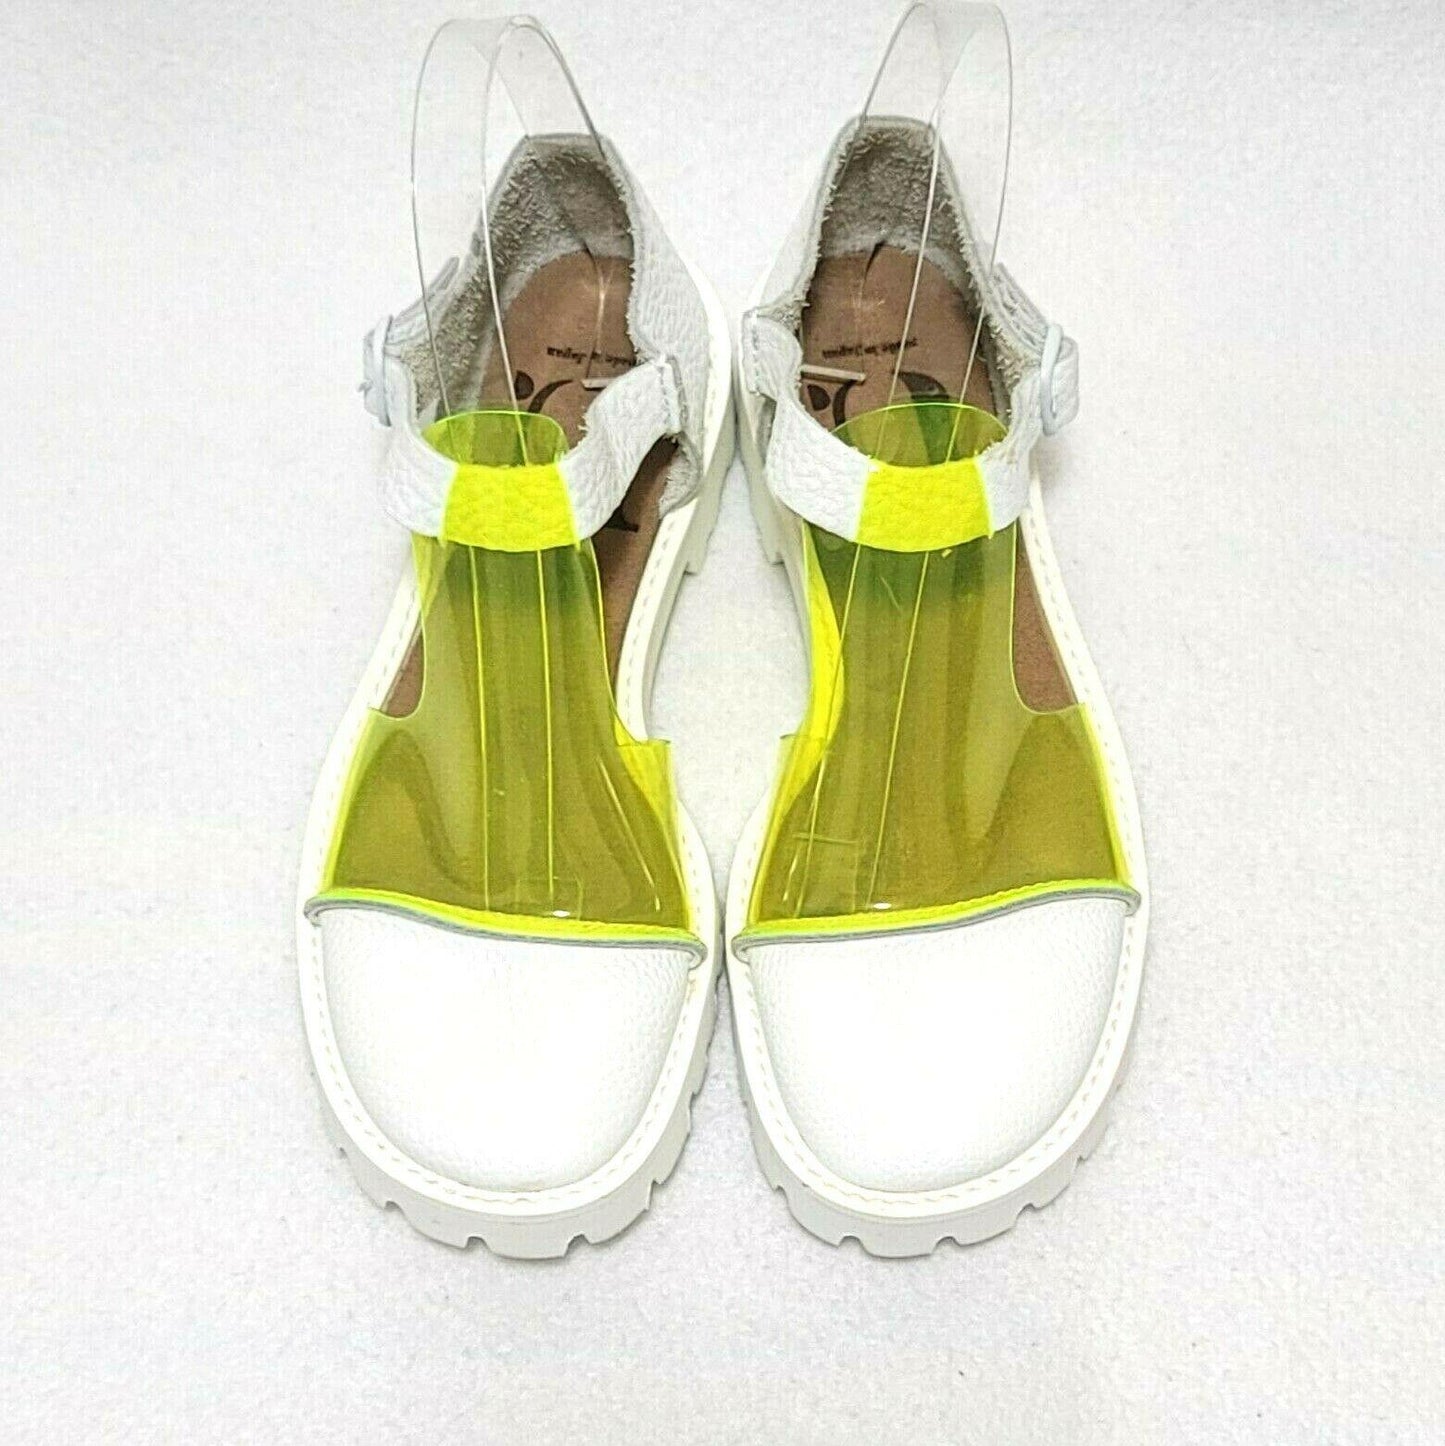 U-DOT Leather Sandals Lug Sole White Yellow Sandals Womens Size US 7 Japan - SVNYFancy